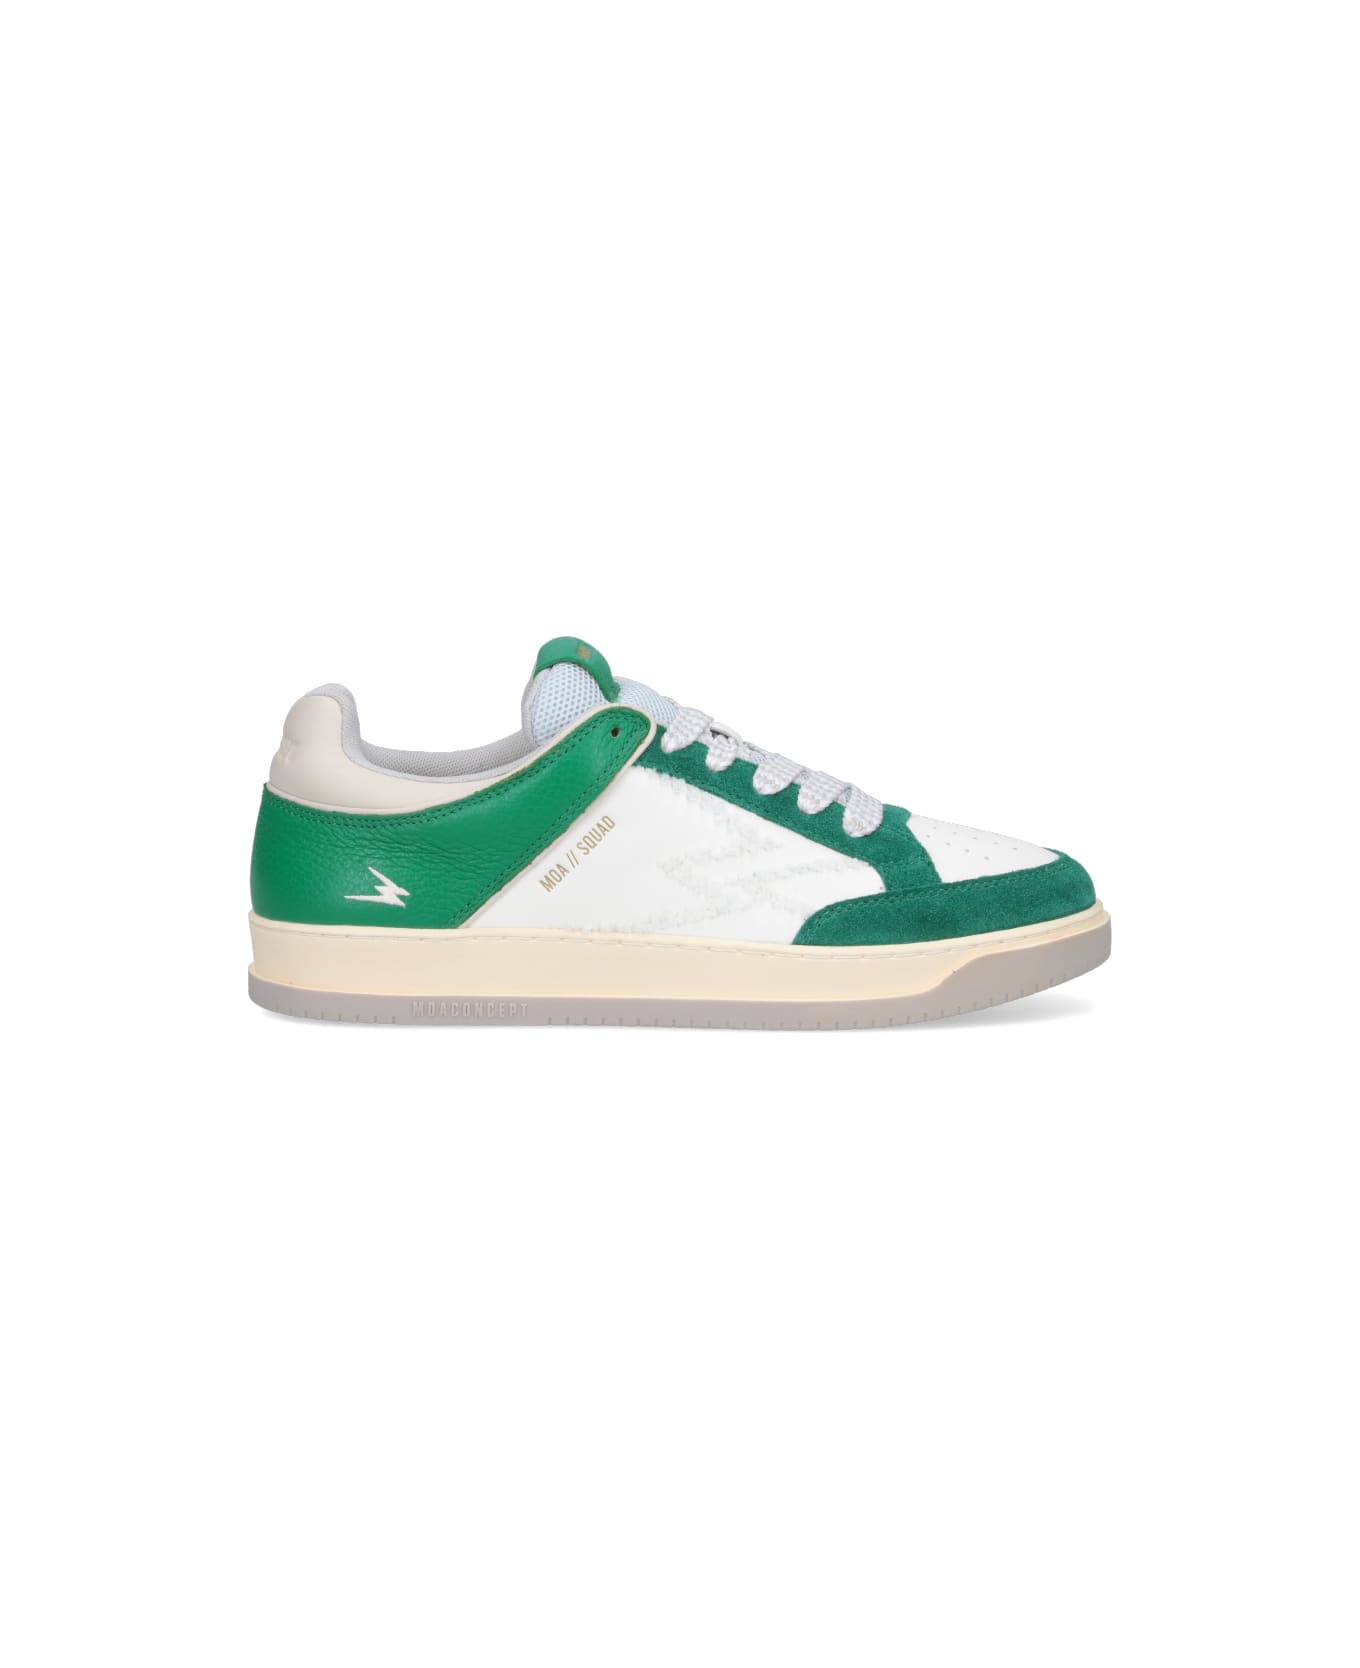 M.O.A. master of arts 'squad' Sneakers - Green